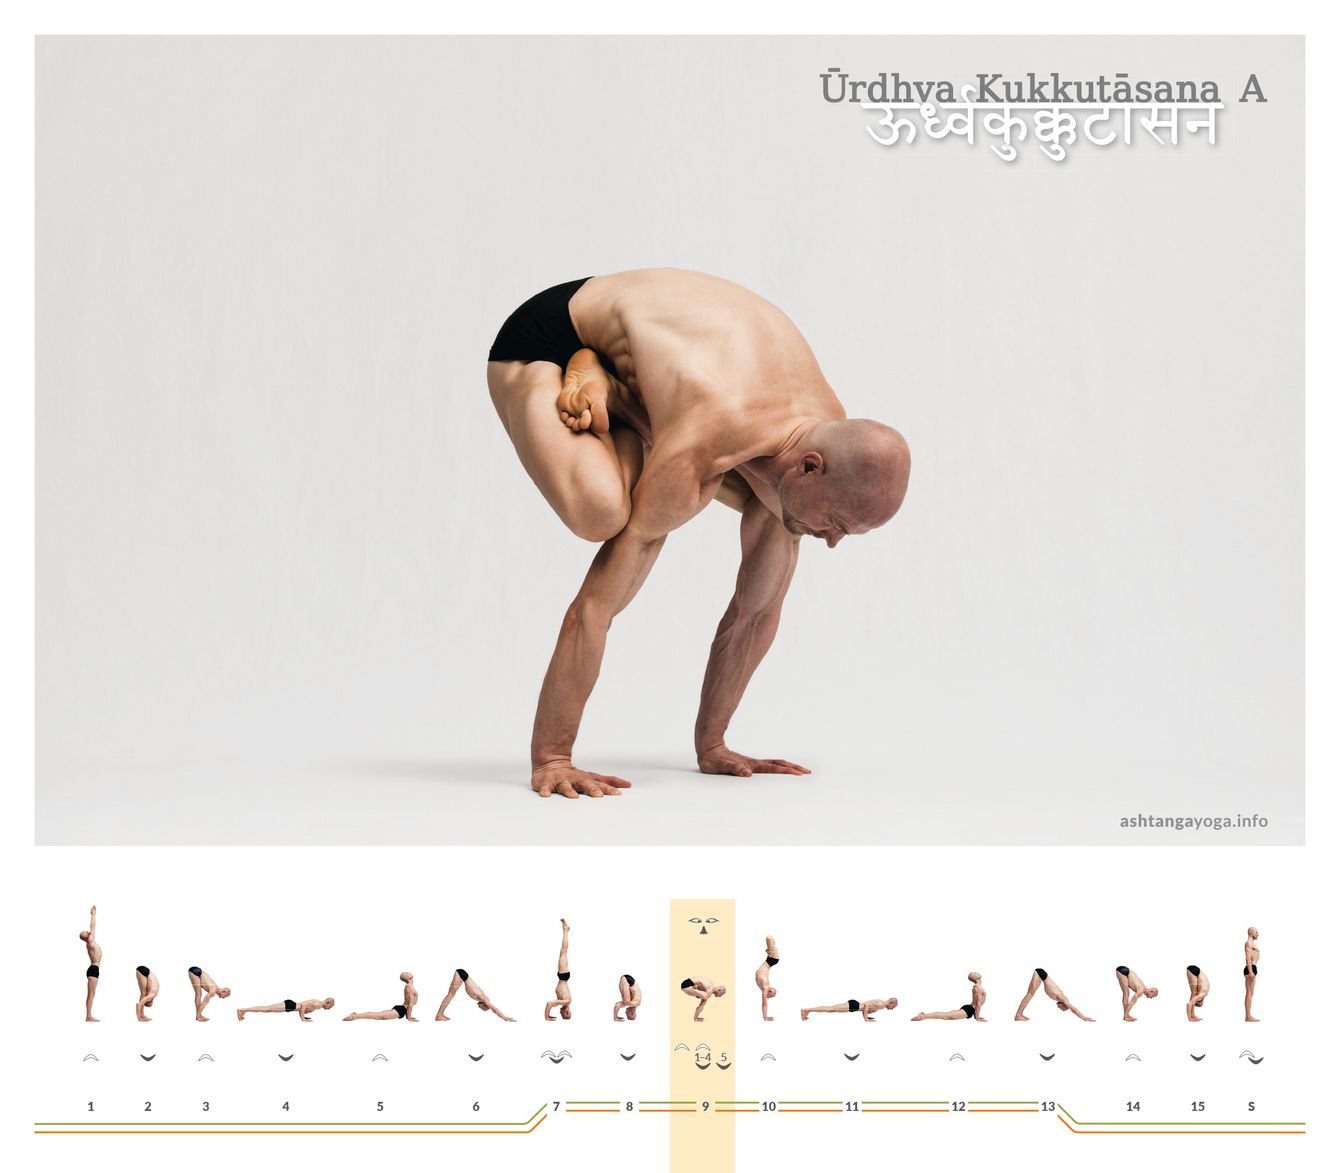 The pose of the 'Upward Rooster,' Urdhva Kukkutasana, is an arm balance position in which the folded legs in the Lotus pose are supported on the upper arms.